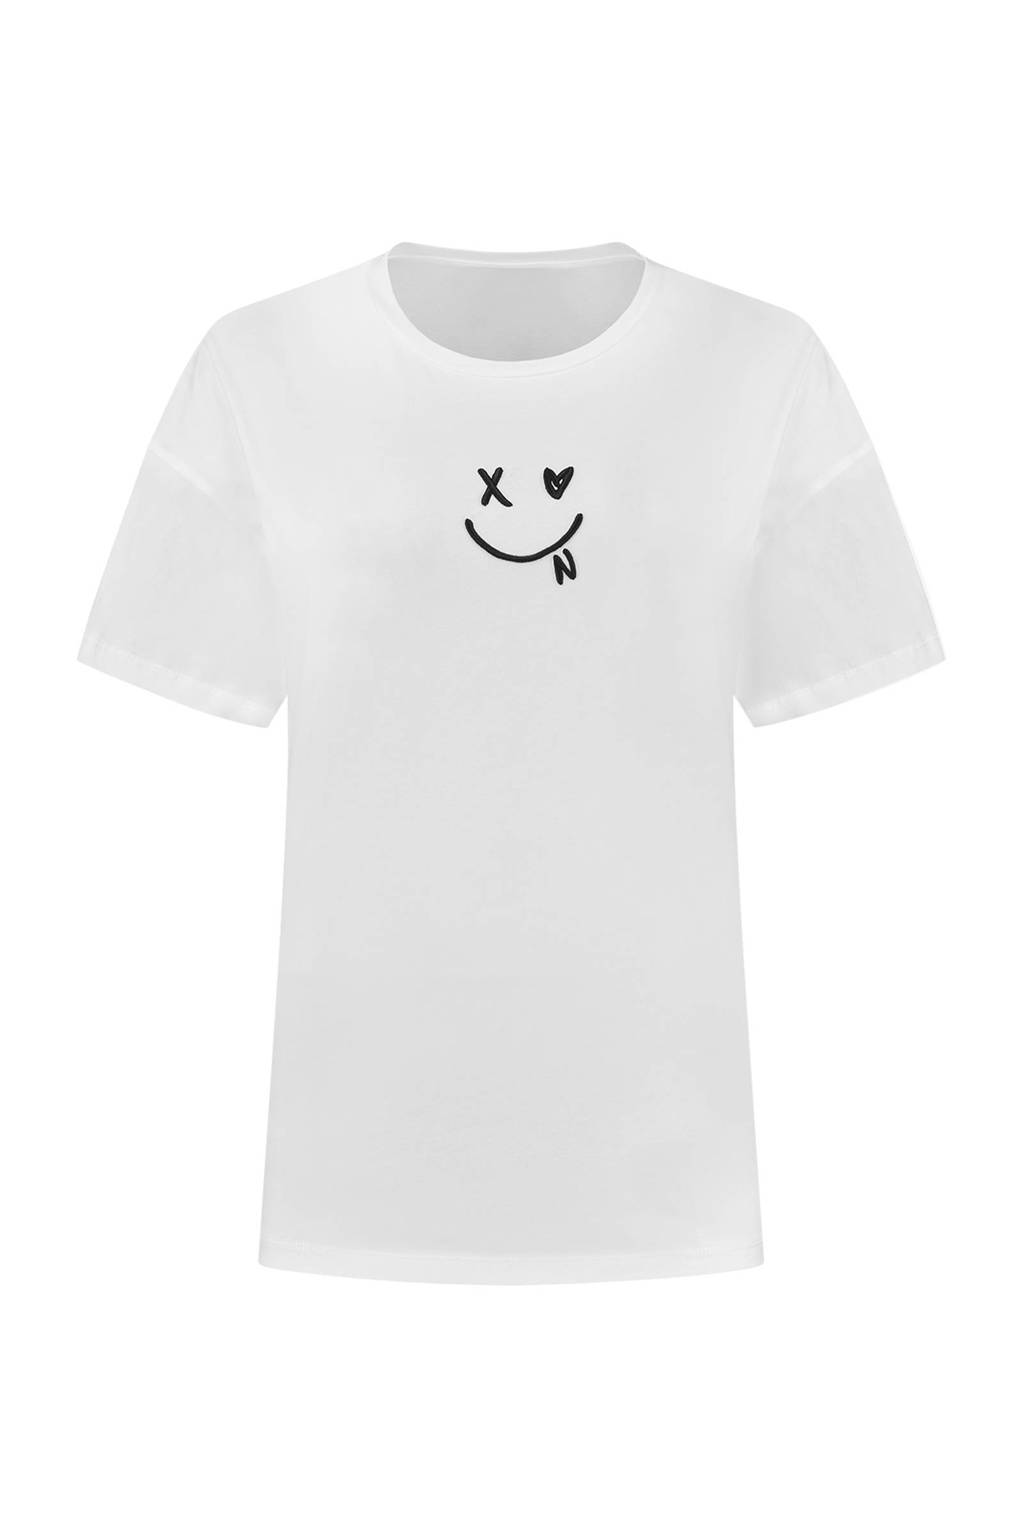 NIKKIE T-shirt Funny wit